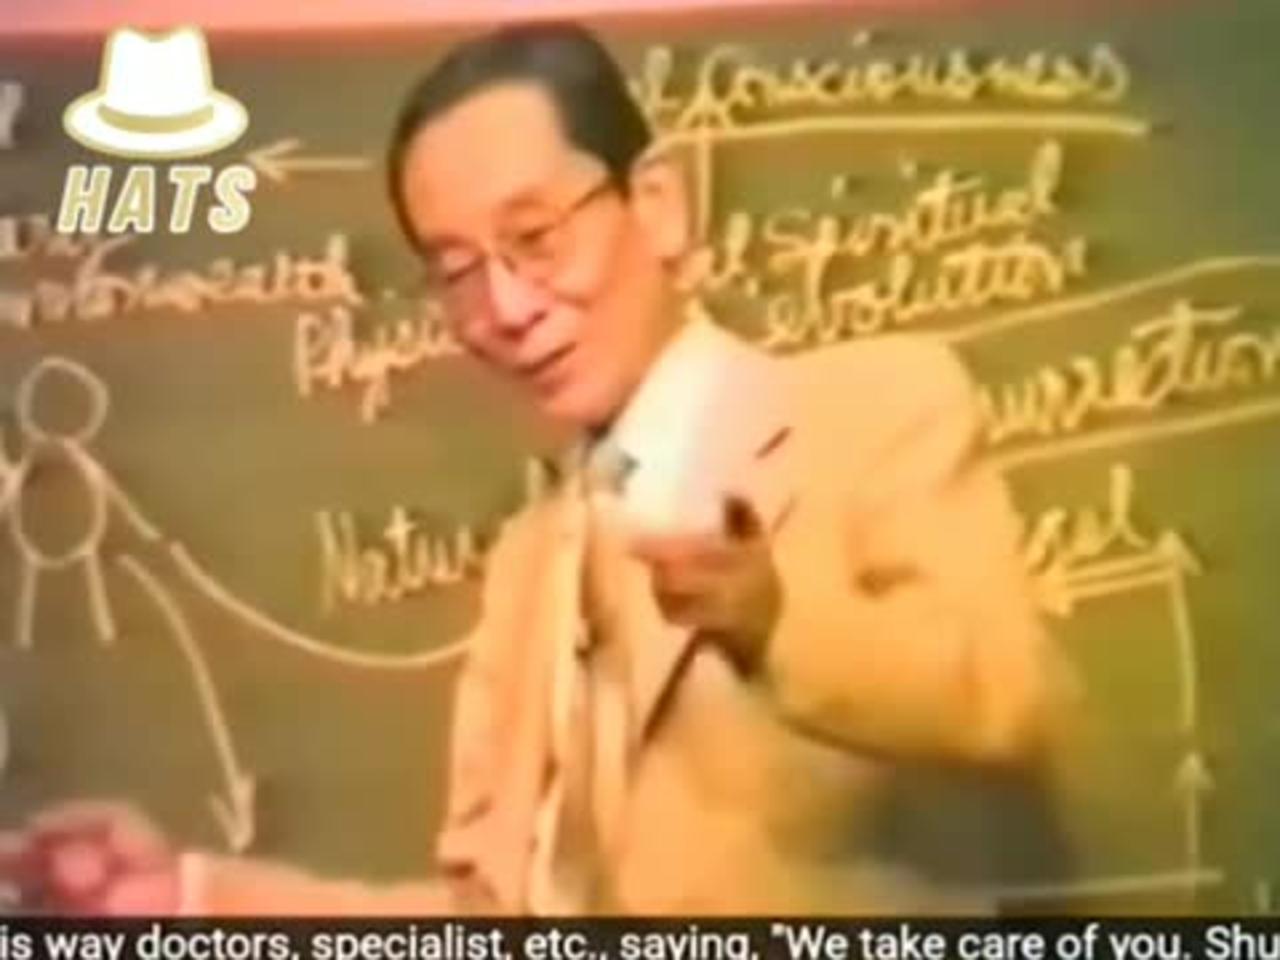 Michio Kushi's powerful 1984 lecture that predicted the future of